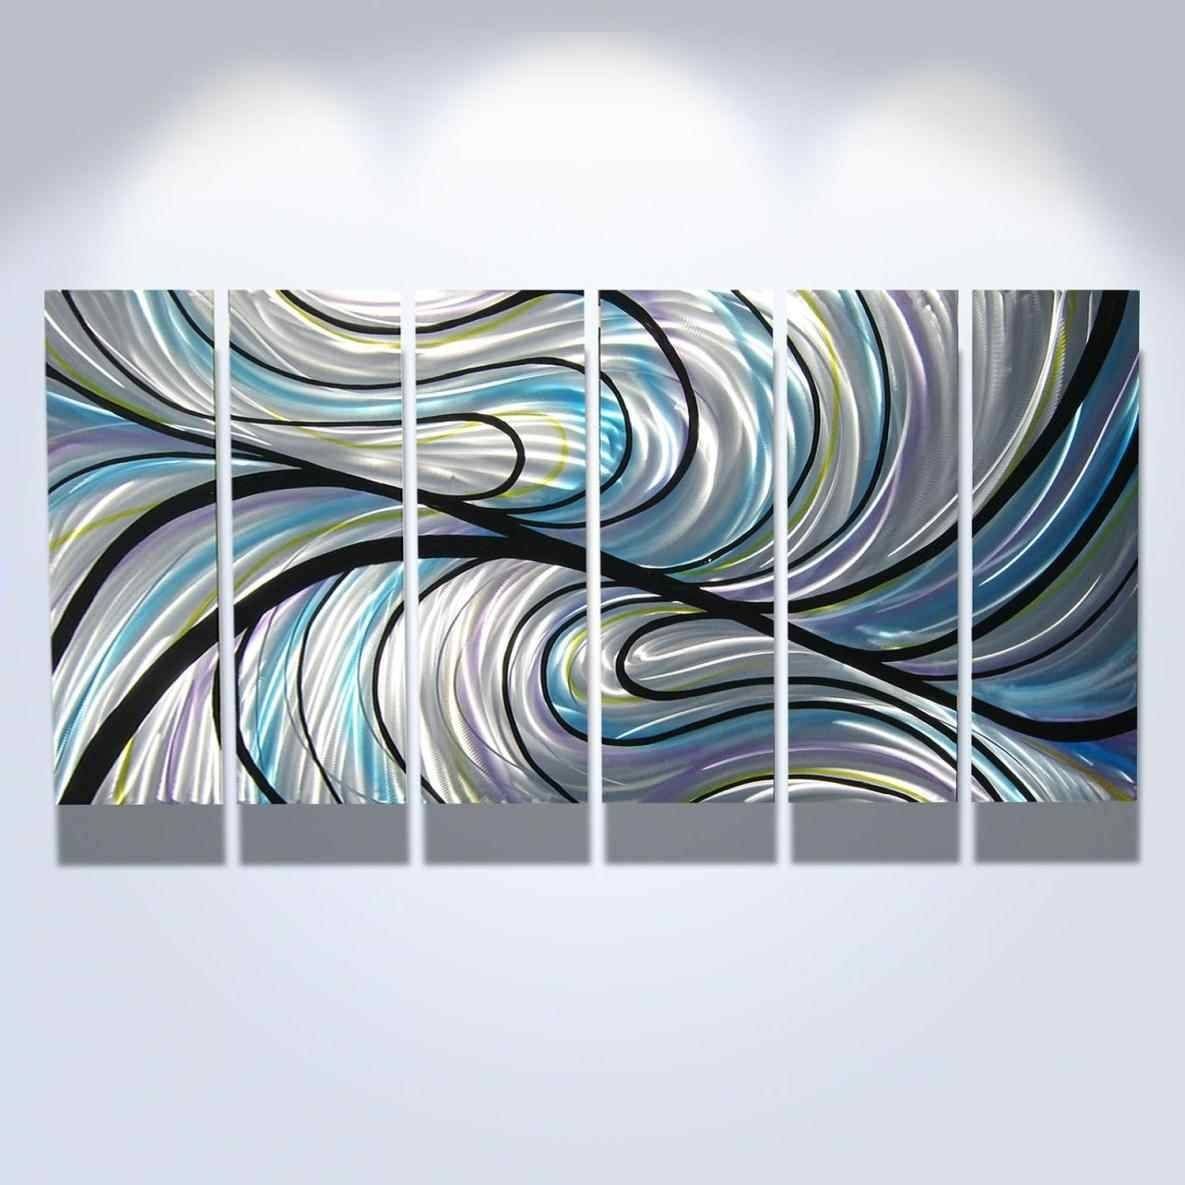 Swirl Metal Wall Art Home Interior Decor – Super Tech For Most Popular Teal Metal Wall Art (Gallery 19 of 20)